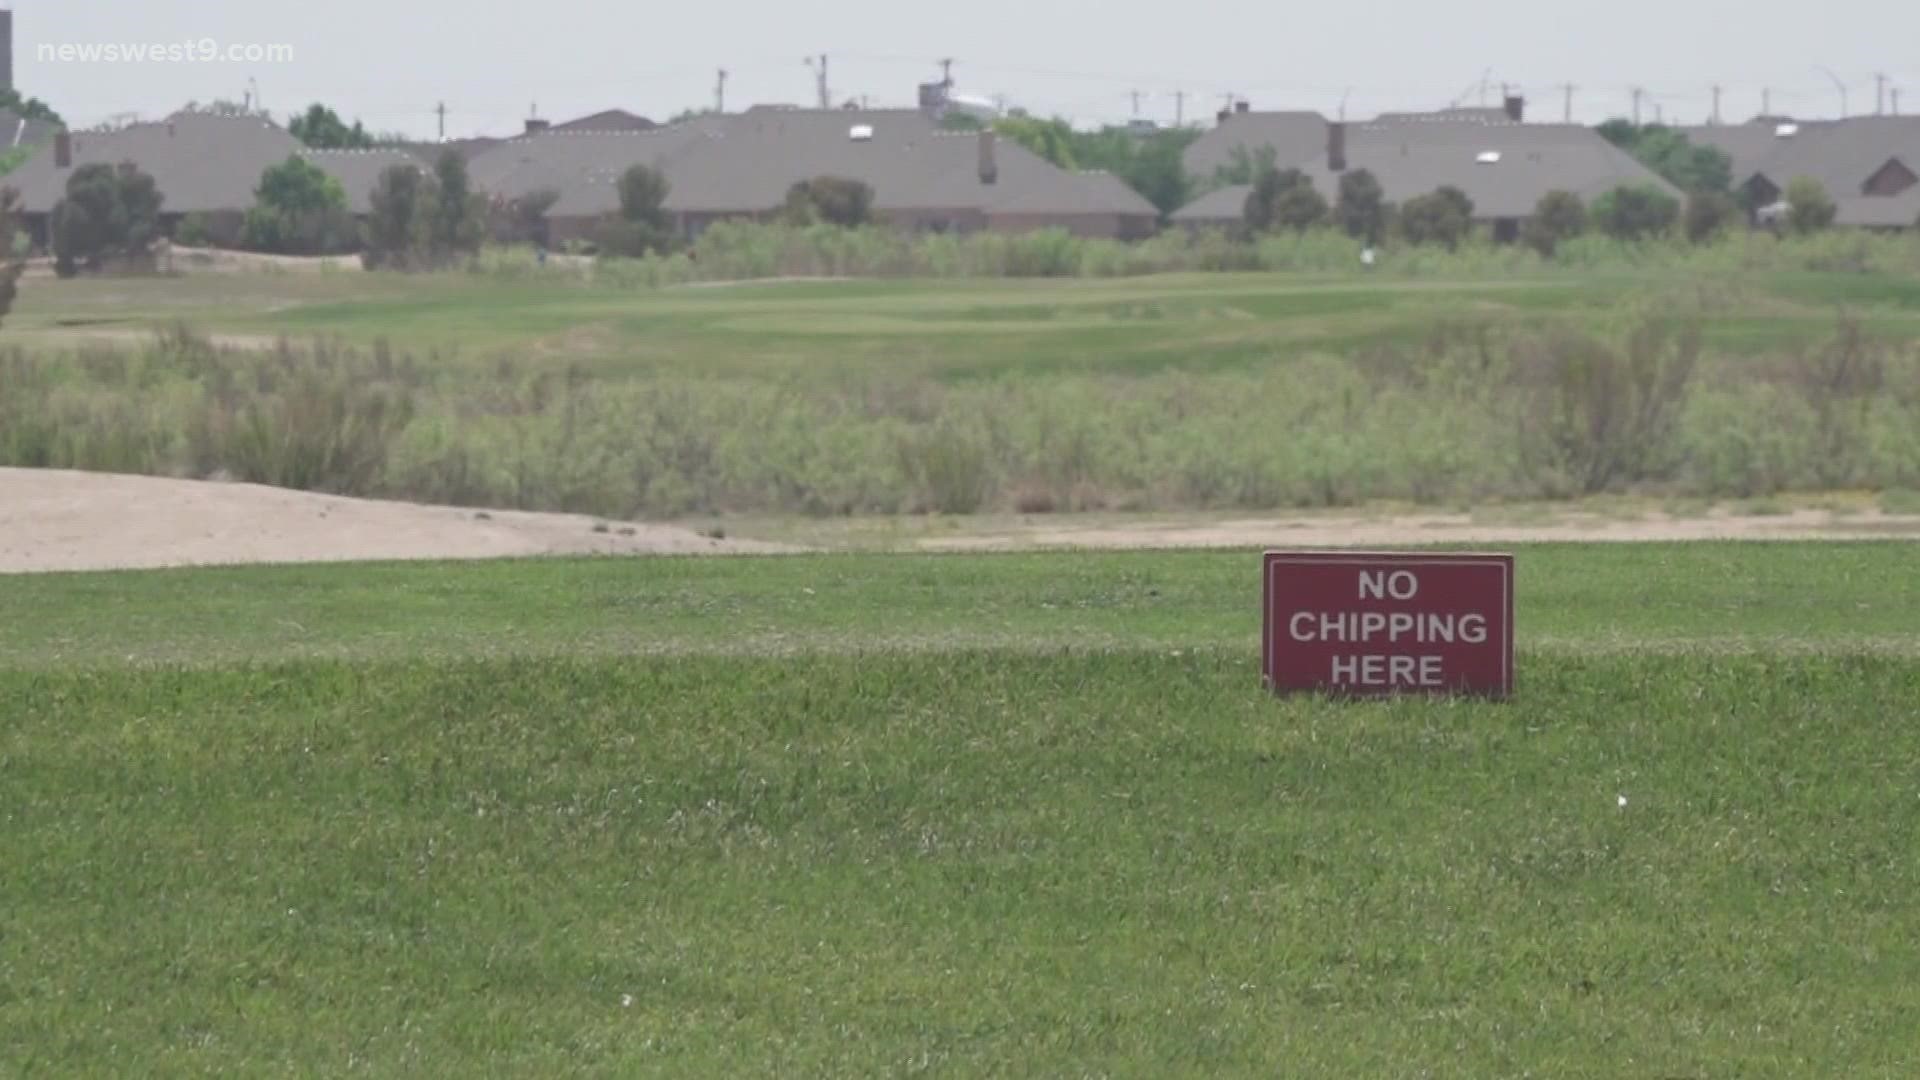 During a planning and zoning meeting, the commissioners discussed moving forward on plans for the golf course.